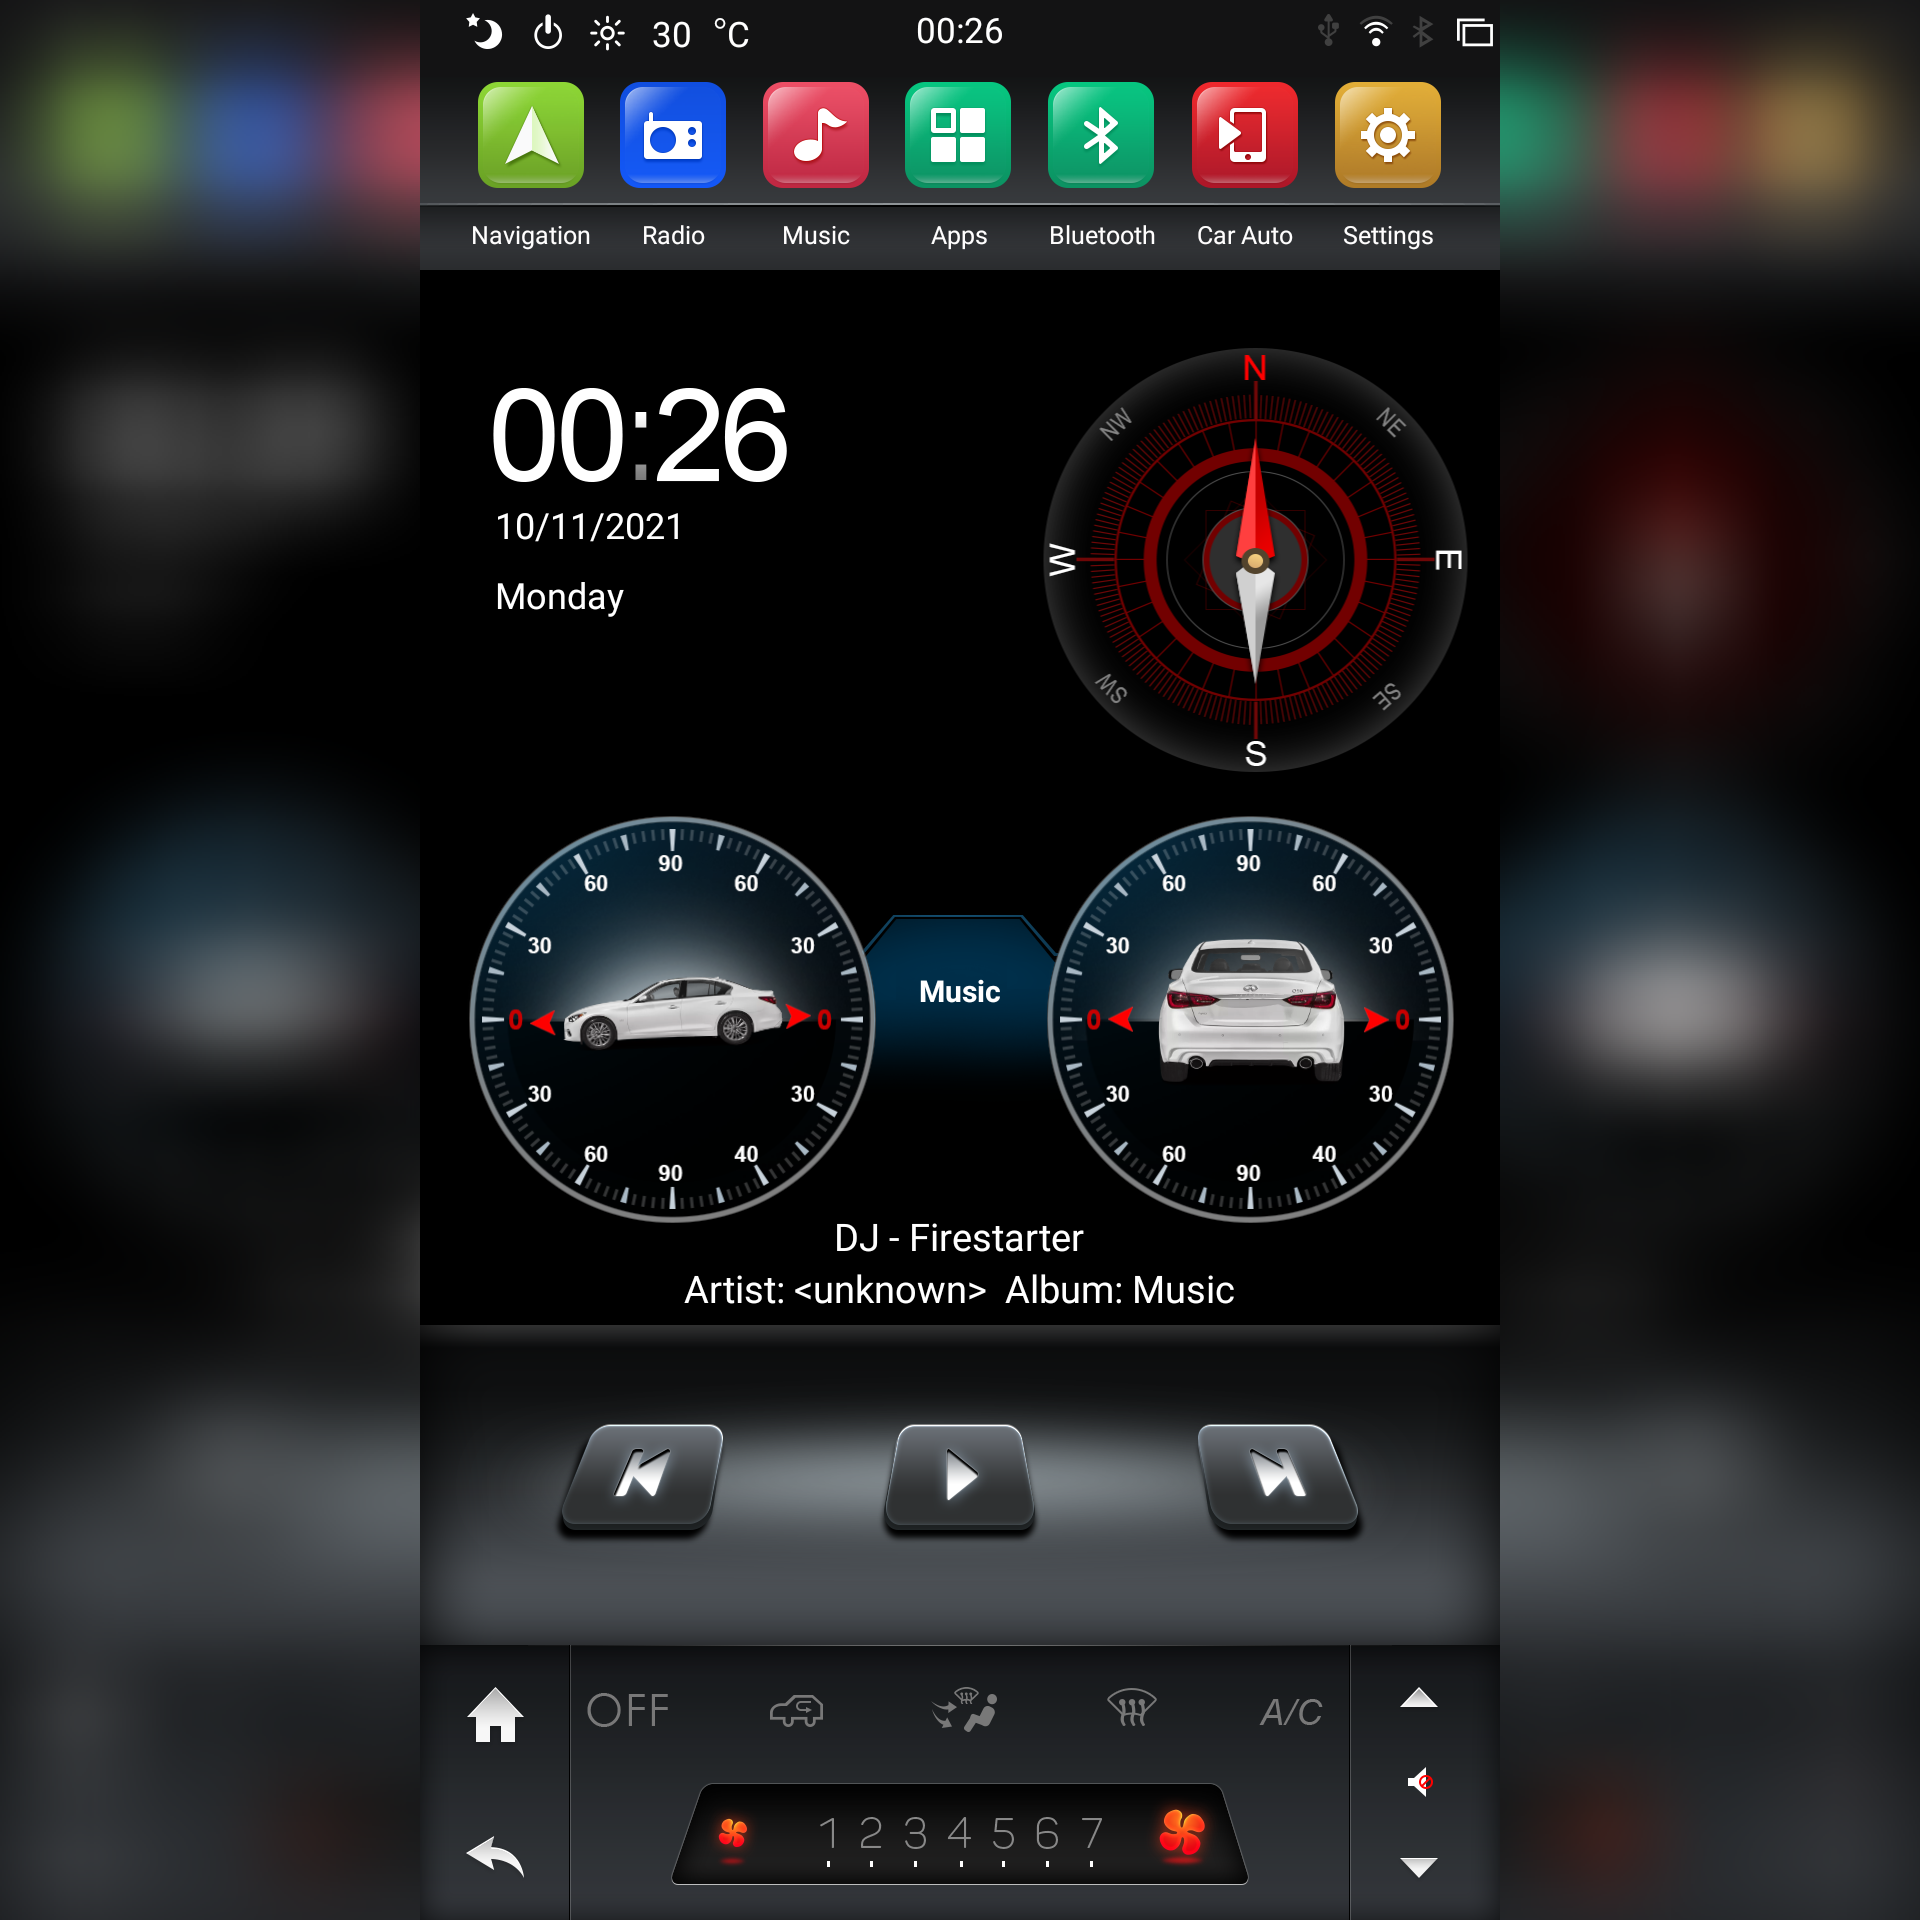 Sergey firmware for PX6 Android 9 units - Smart Car Stereo Radio Navigation | In-Dash audio/video players online - Phoenix Automotive